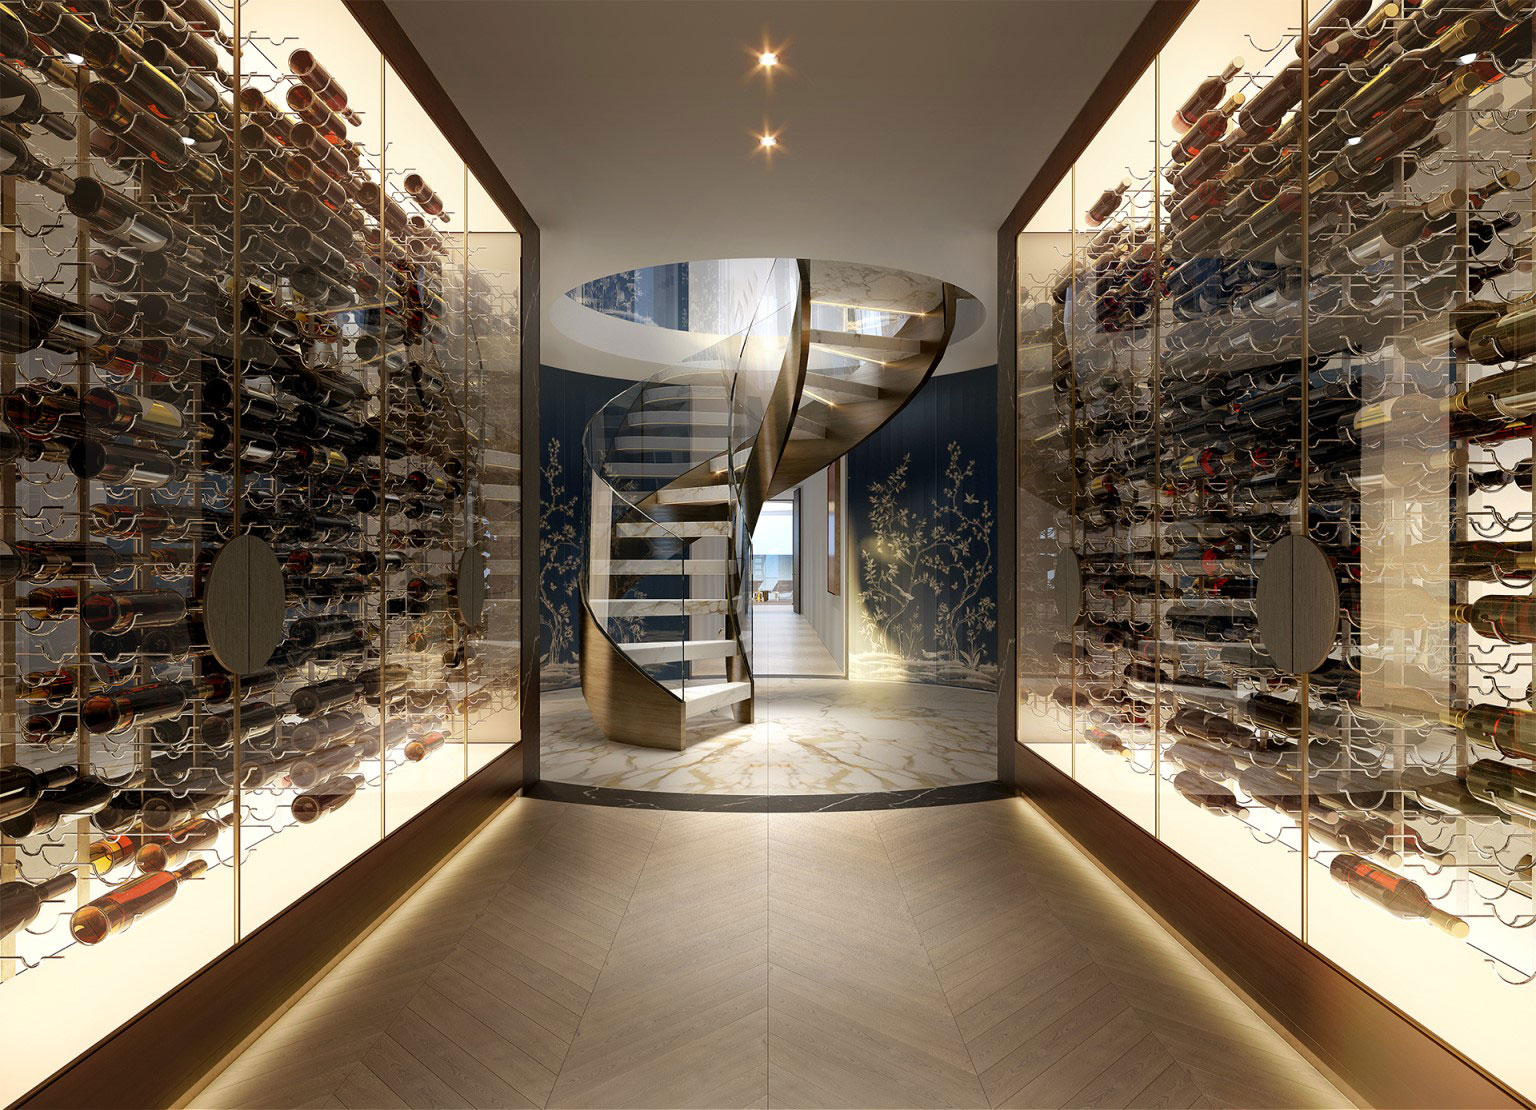 The penthouse will feature a 1000-bottle wine cellar which will be accessible via a sculptural spiral staircase.  